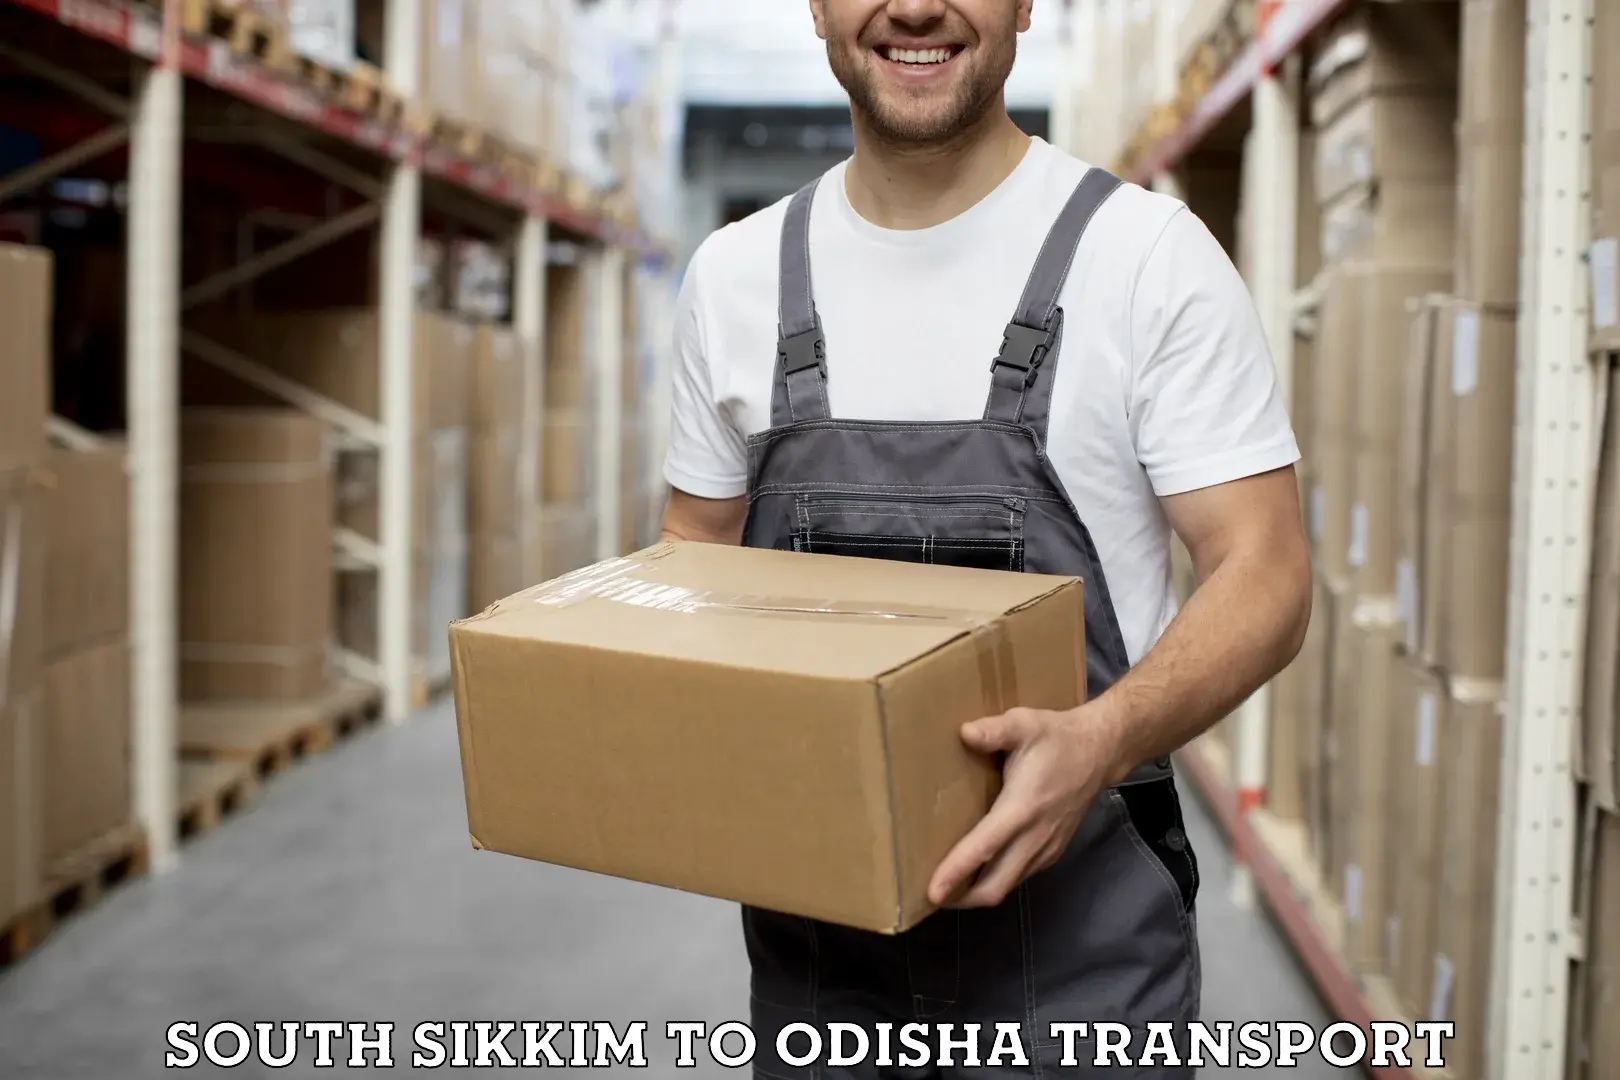 Furniture transport service South Sikkim to Aul